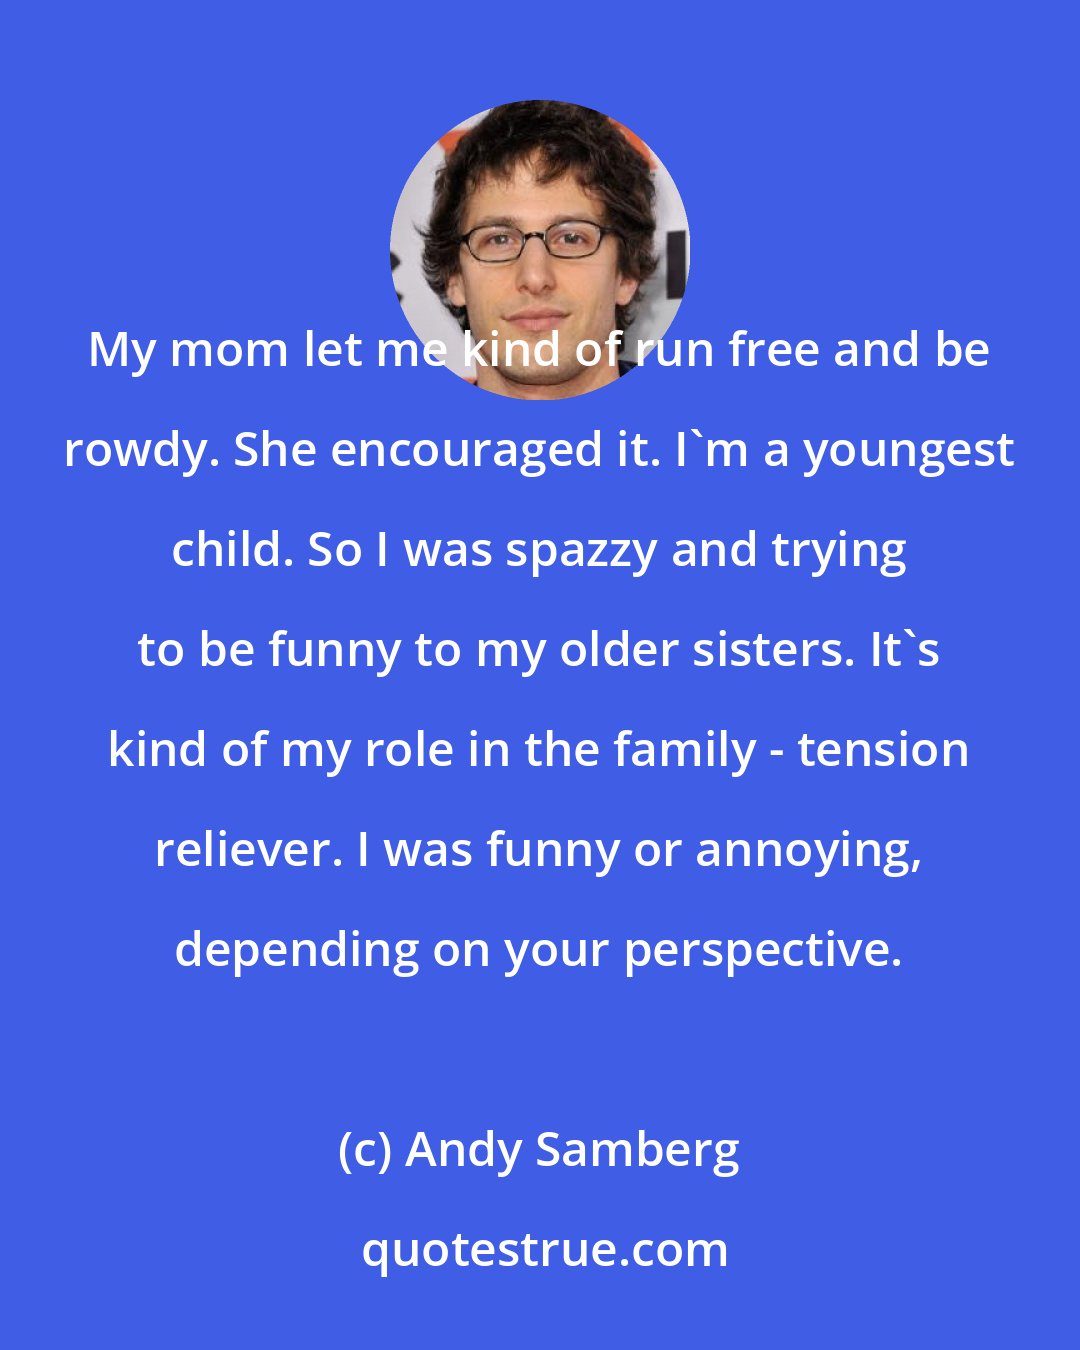 Andy Samberg: My mom let me kind of run free and be rowdy. She encouraged it. I'm a youngest child. So I was spazzy and trying to be funny to my older sisters. It's kind of my role in the family - tension reliever. I was funny or annoying, depending on your perspective.